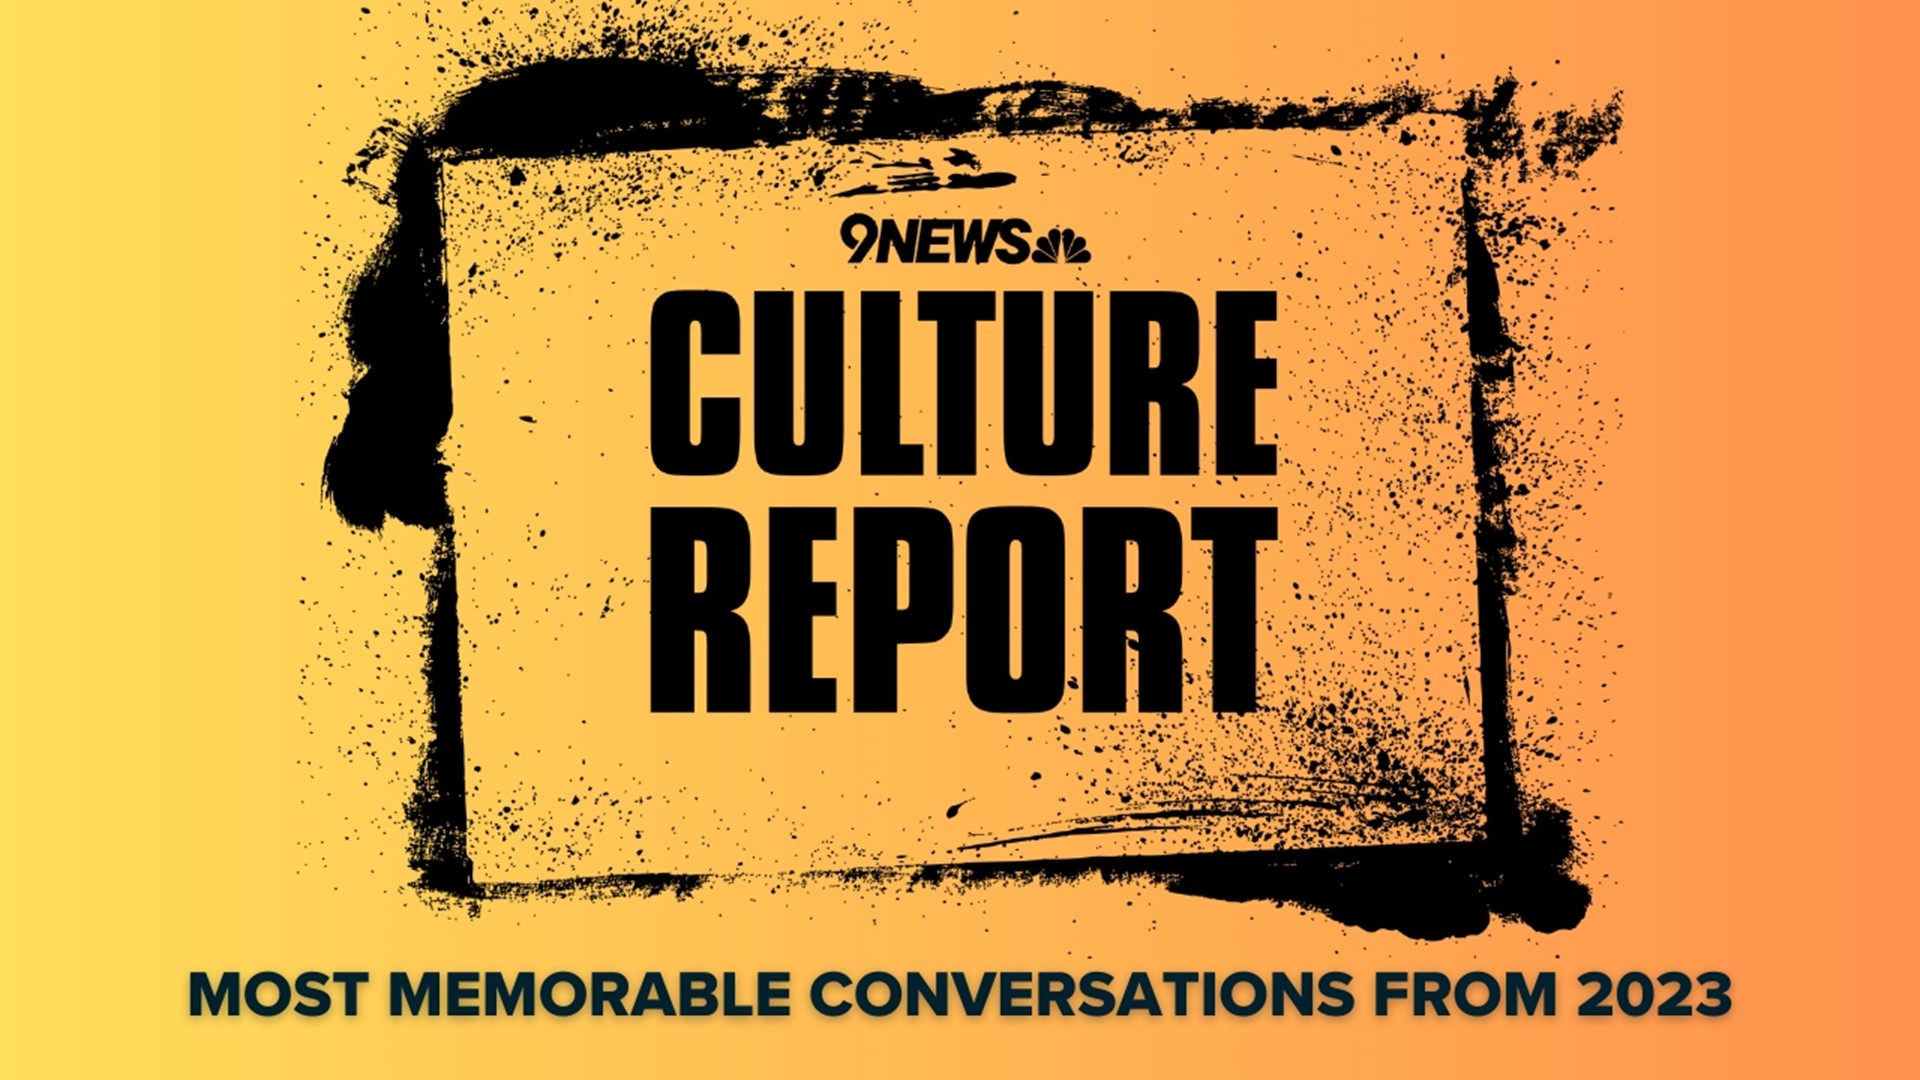 On this week's episode of the Culture Report, we take a look back at some of our favorite conversations from 2023, so far.